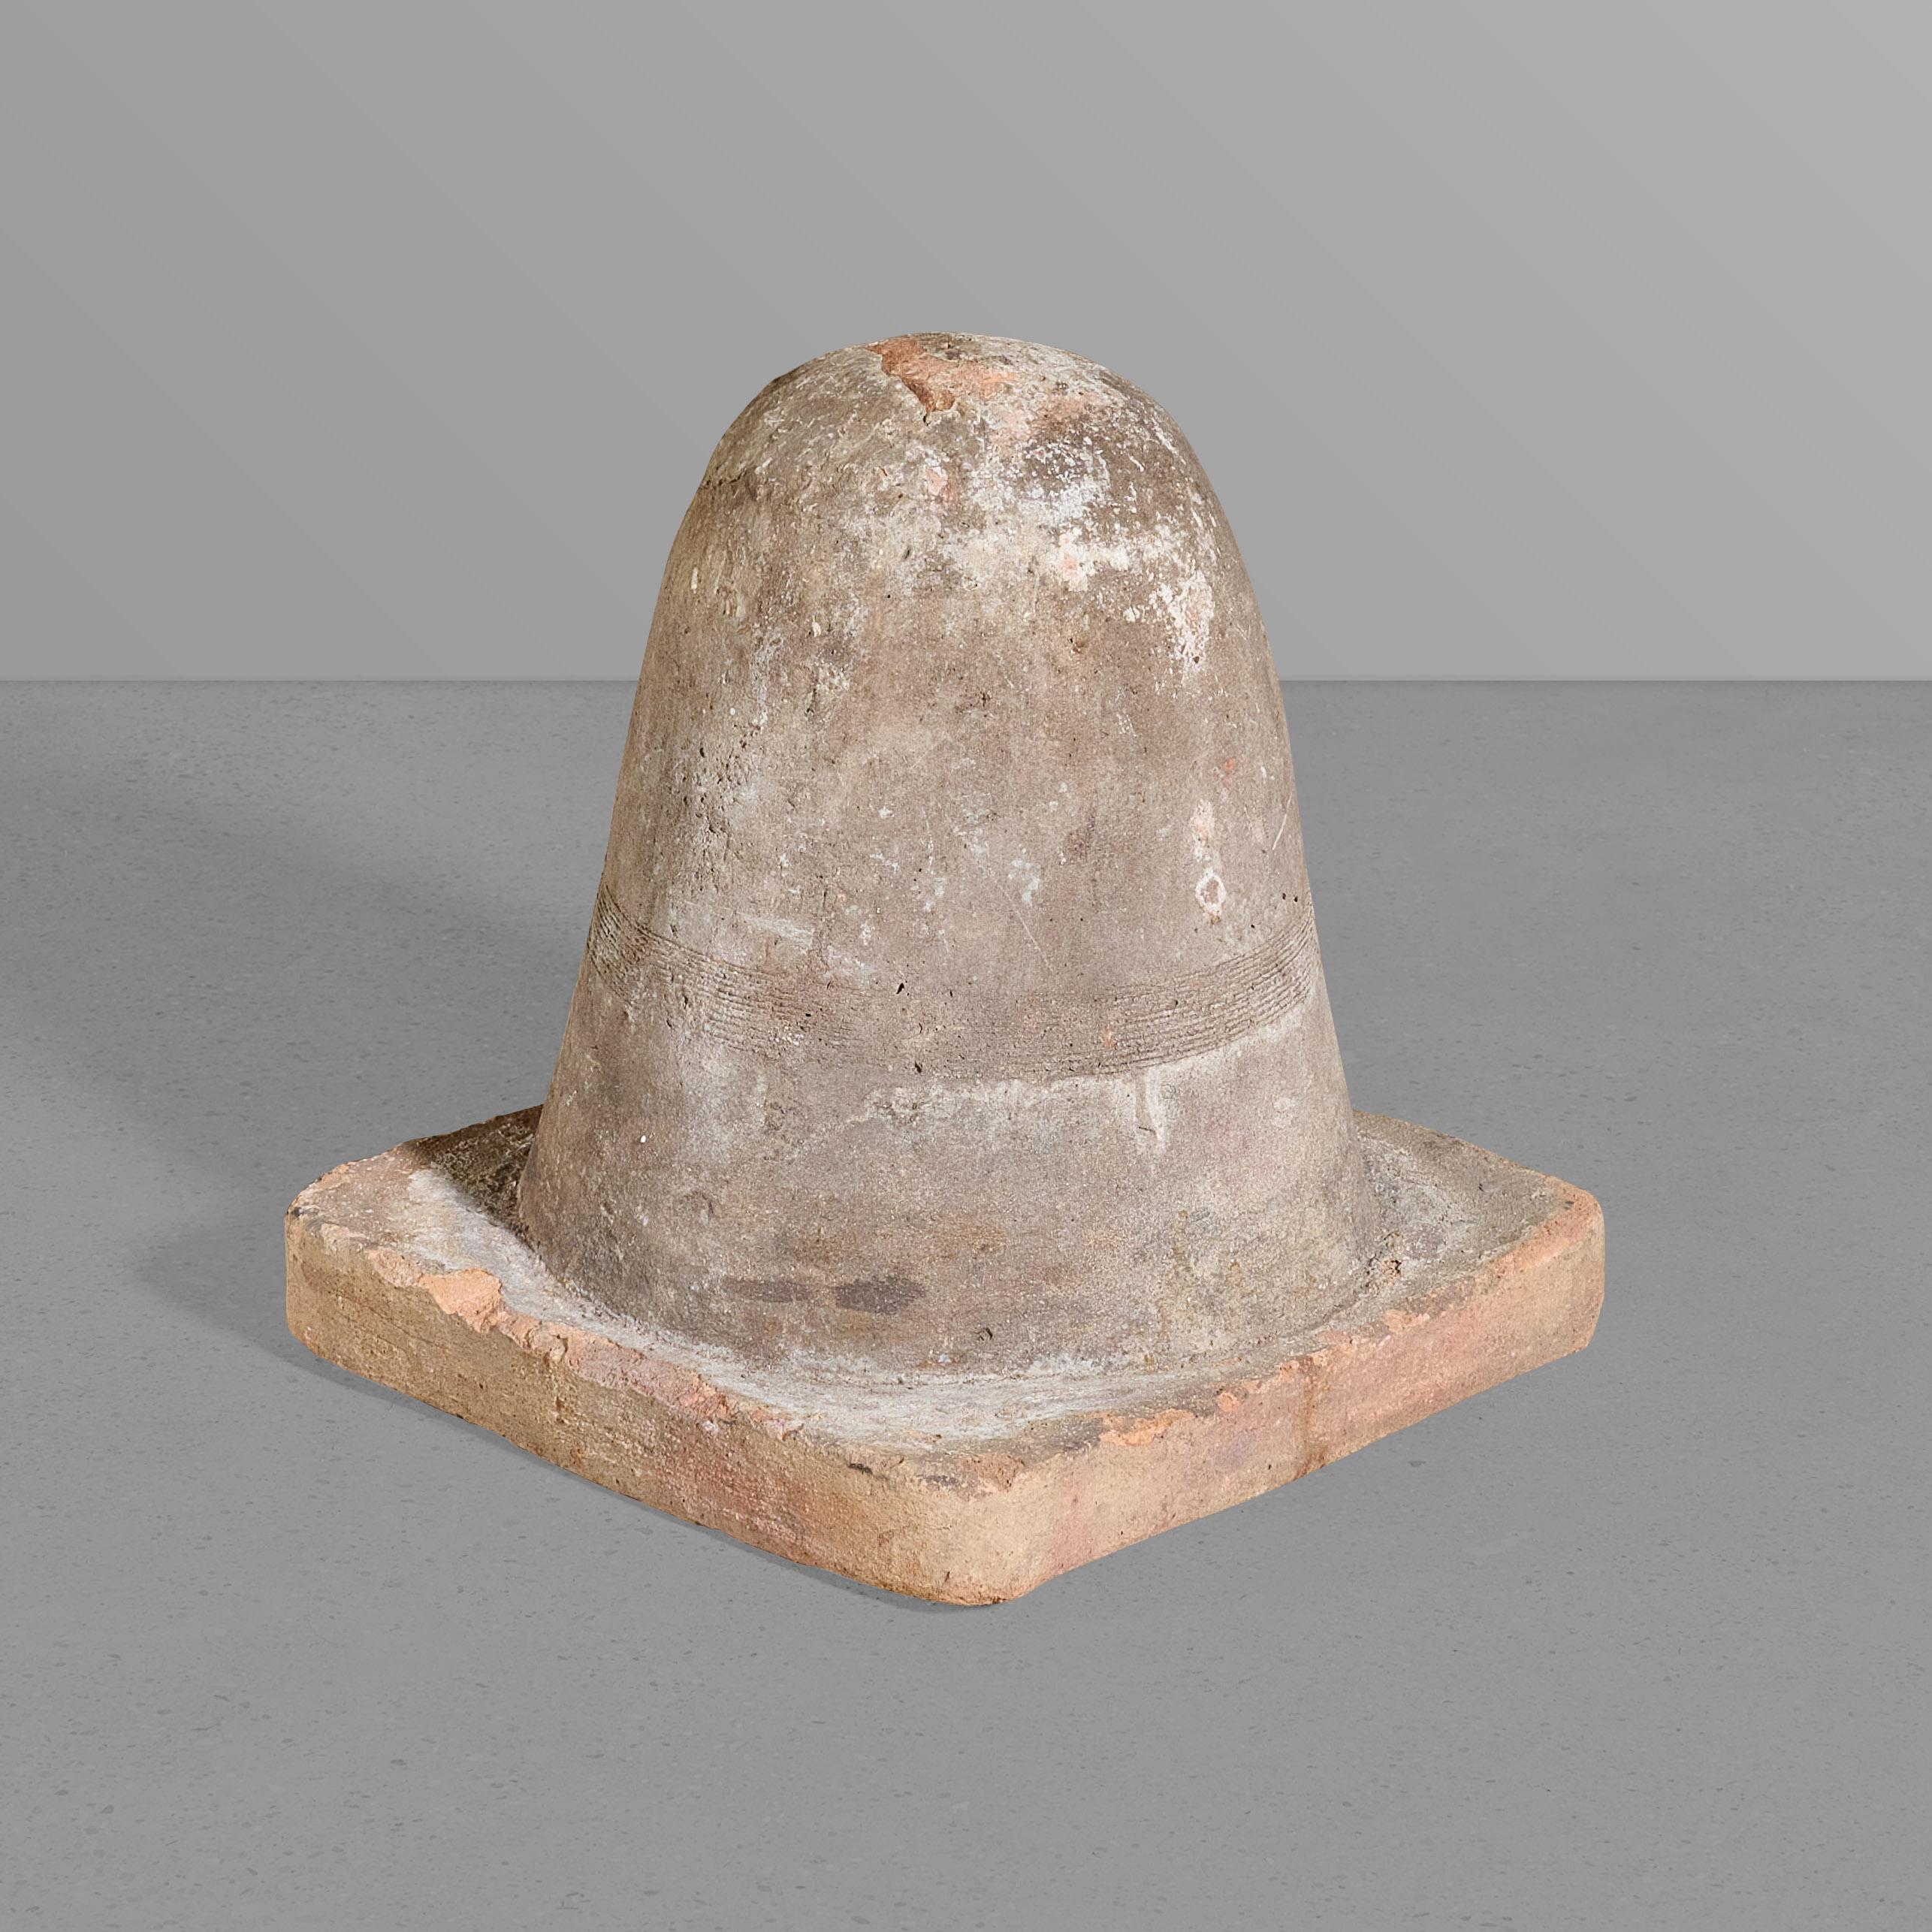 Carved stone water filter from the frontier region of Argentina.

